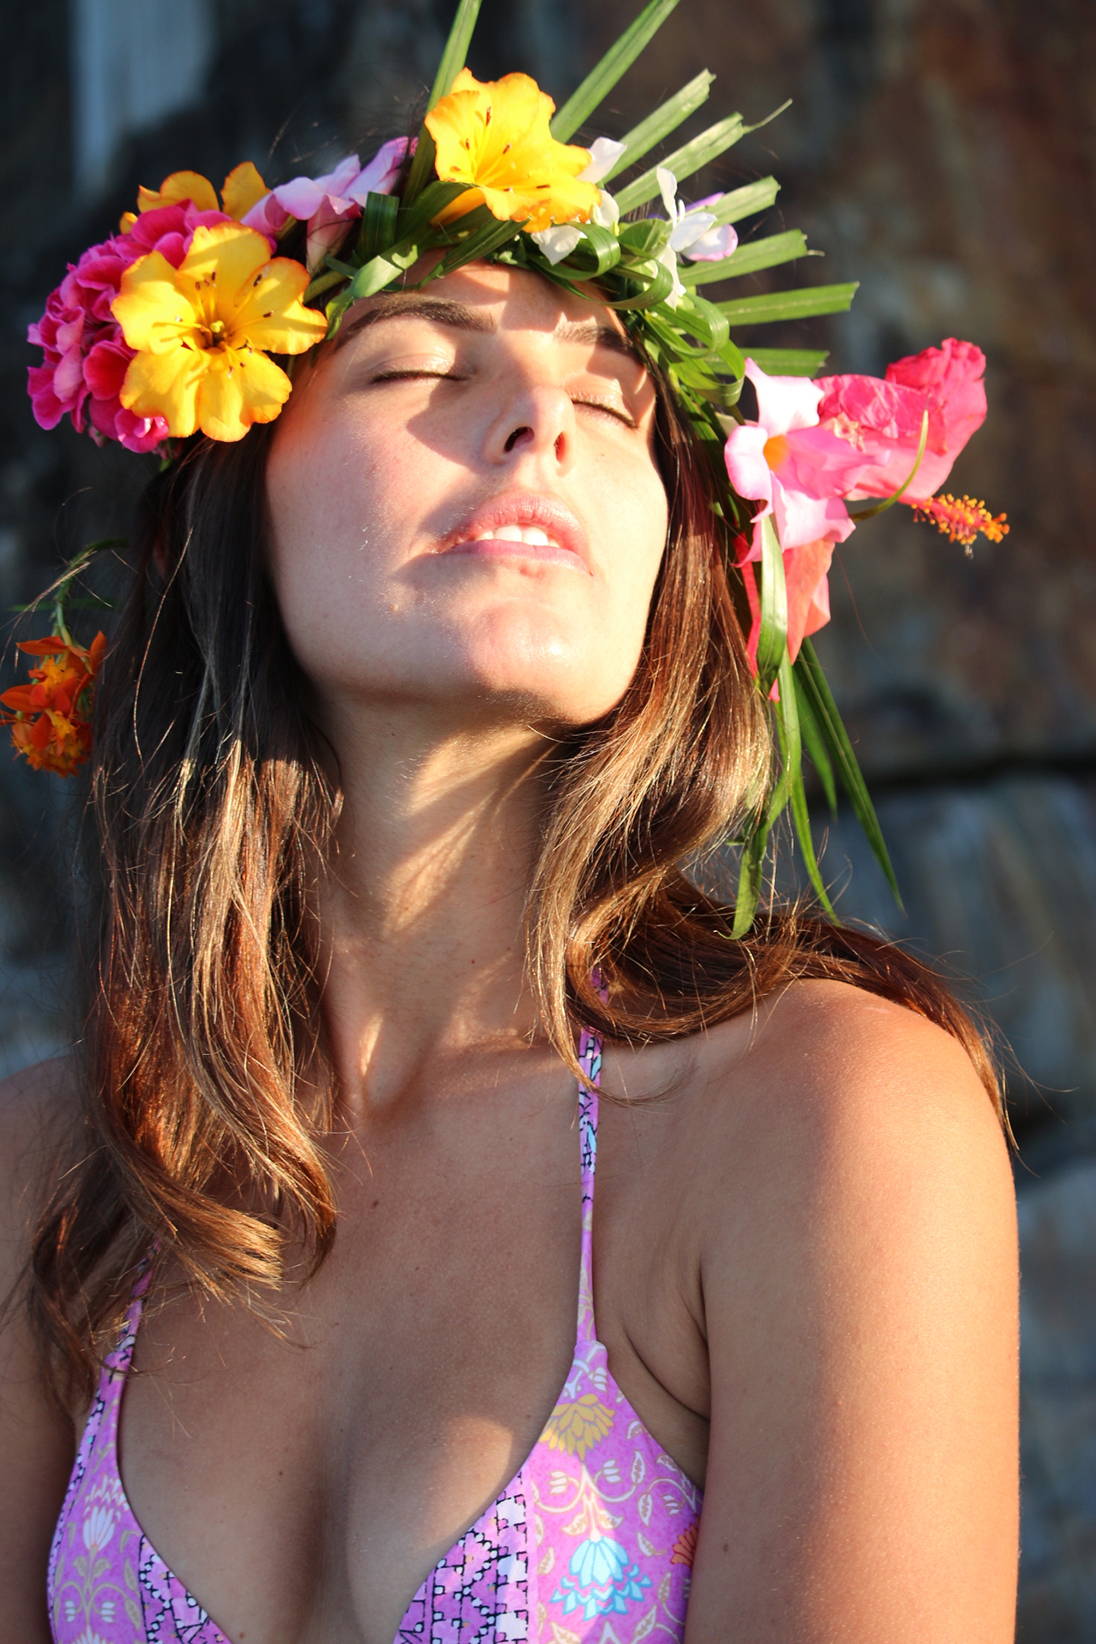 Solo female sailor wears Tigerlily pink boho bikini top with flowers in her hair